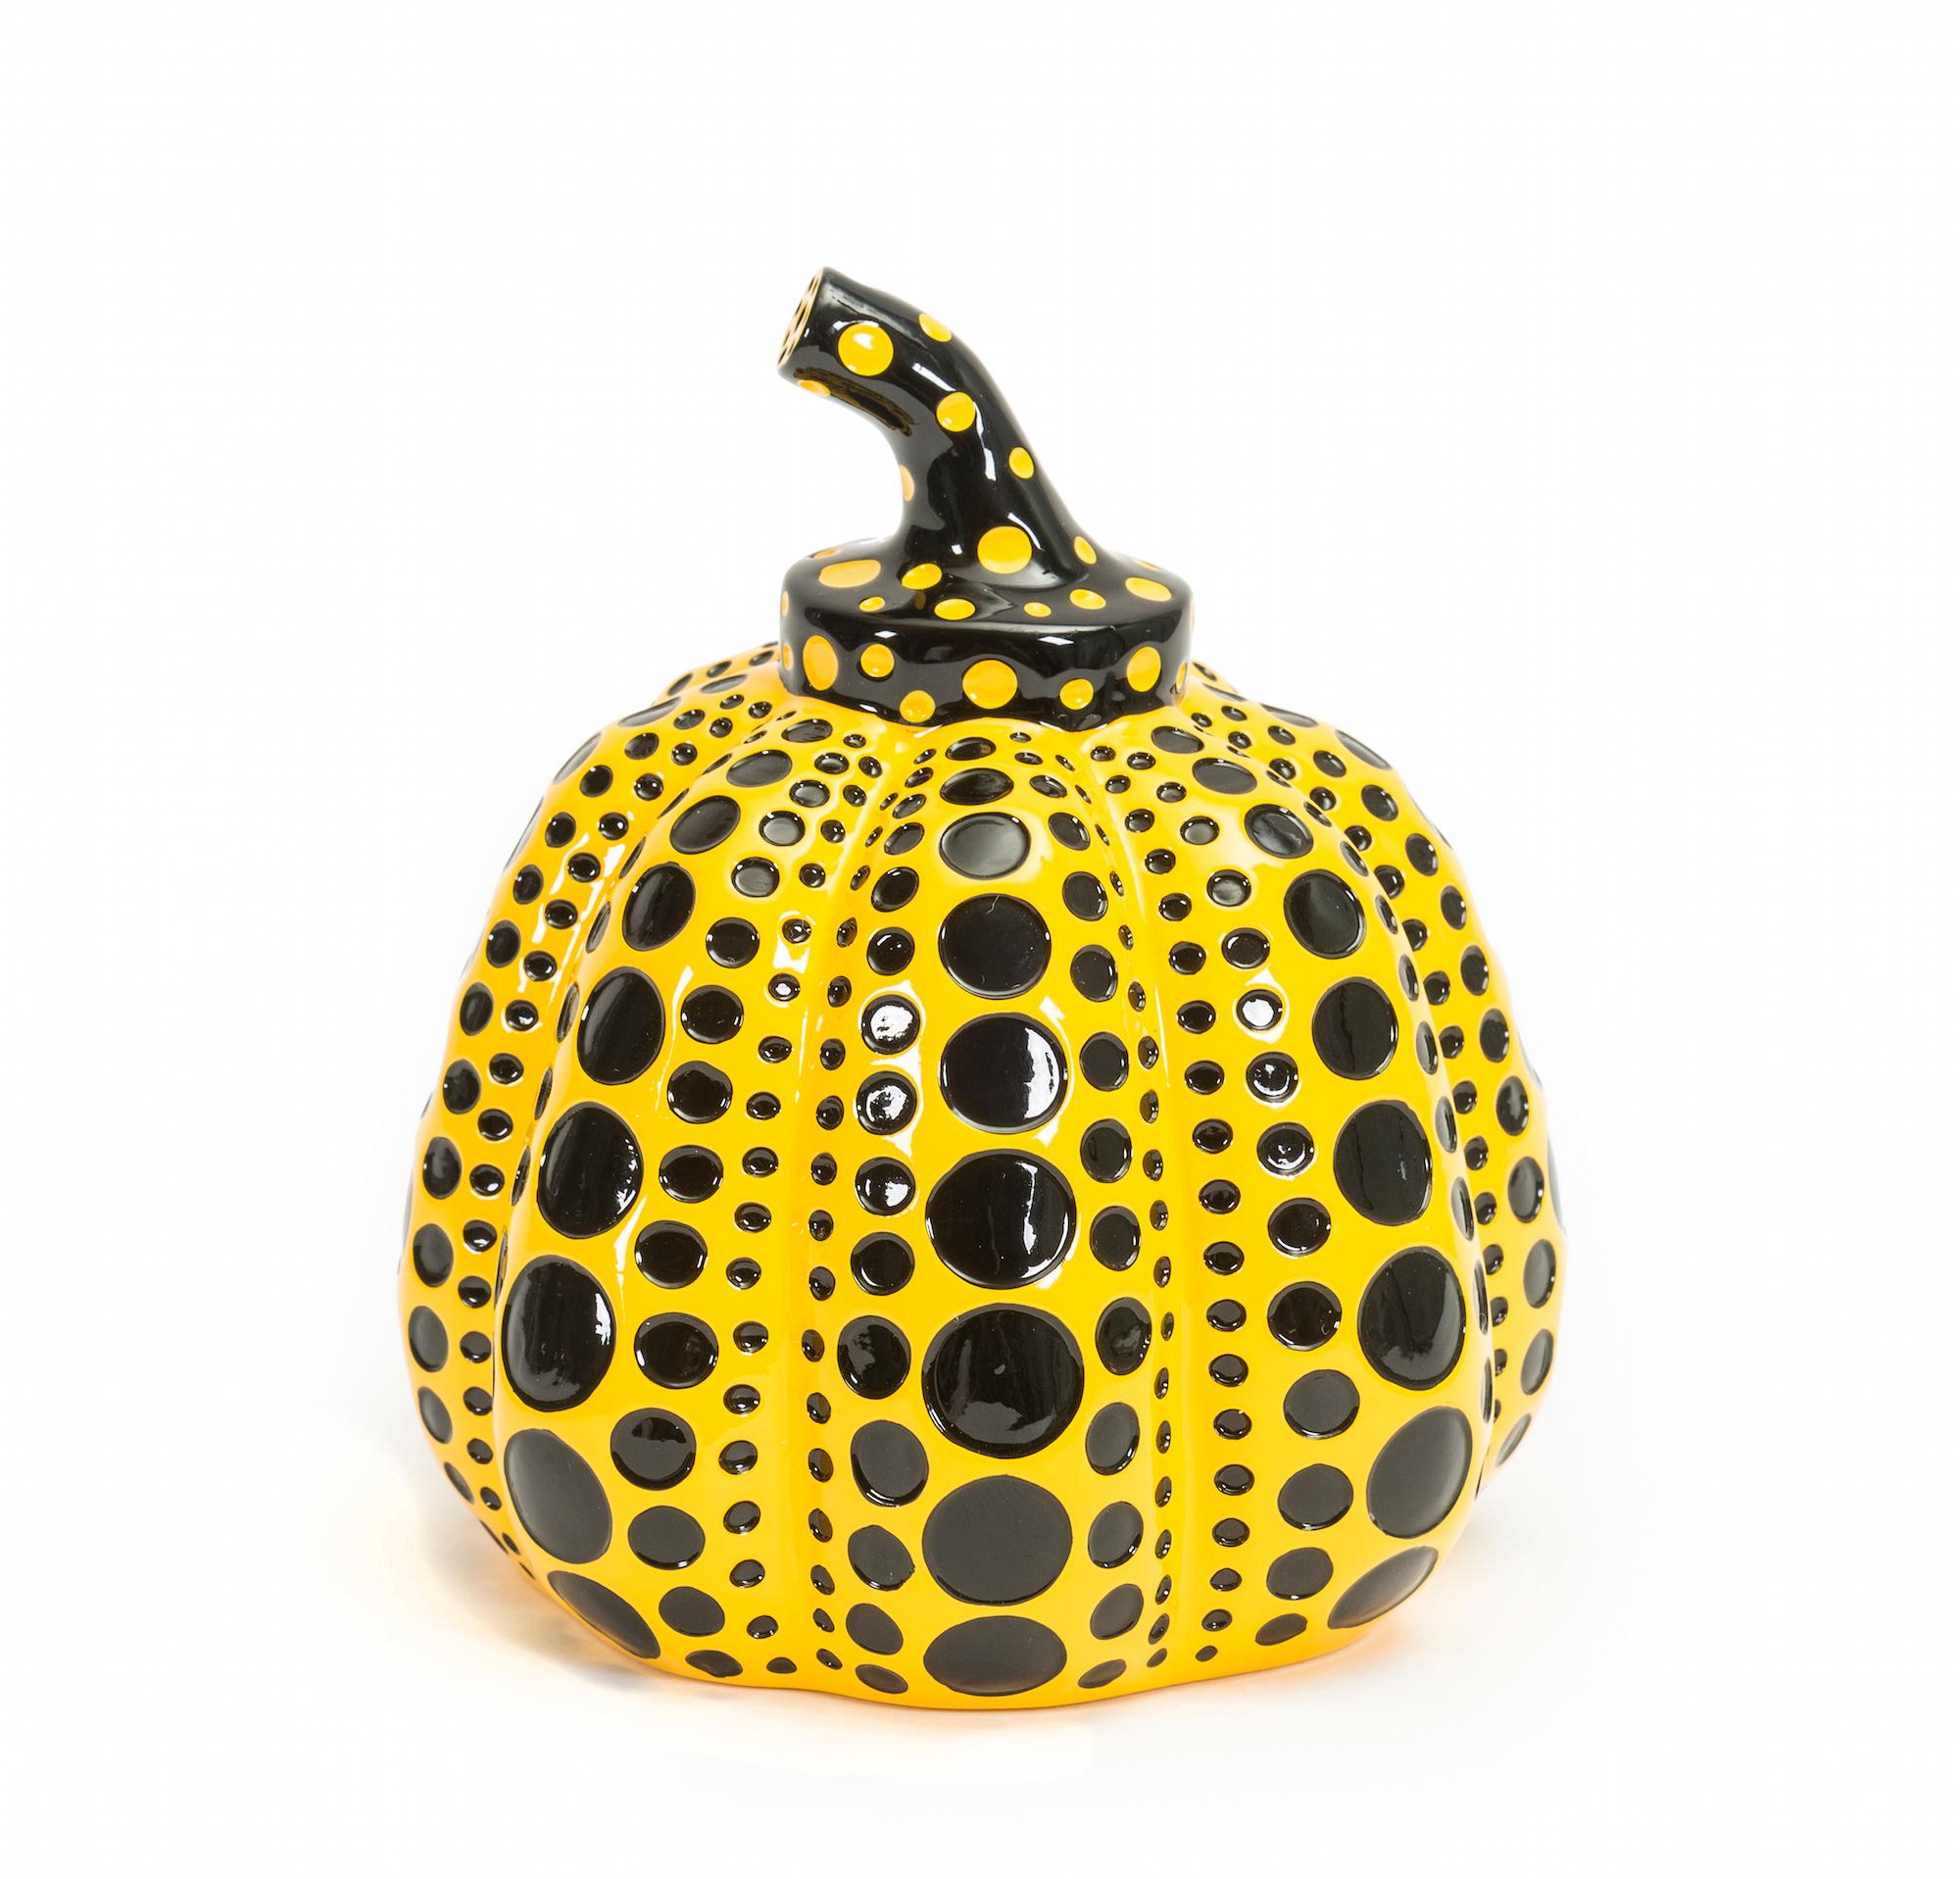 YAYOI KUSAMA 
Pumpkin Object (White) & Pumpkin Object (Yellow), 2016 

The set of two painted cast resin multiples
Each stamped on the base
Accompanied by the original boxes
Diameter: 7.5 cm (3.0 in)
Height: 9.5 cm (3.7 in)
Box: 10.6 x 12.4 x 12.4